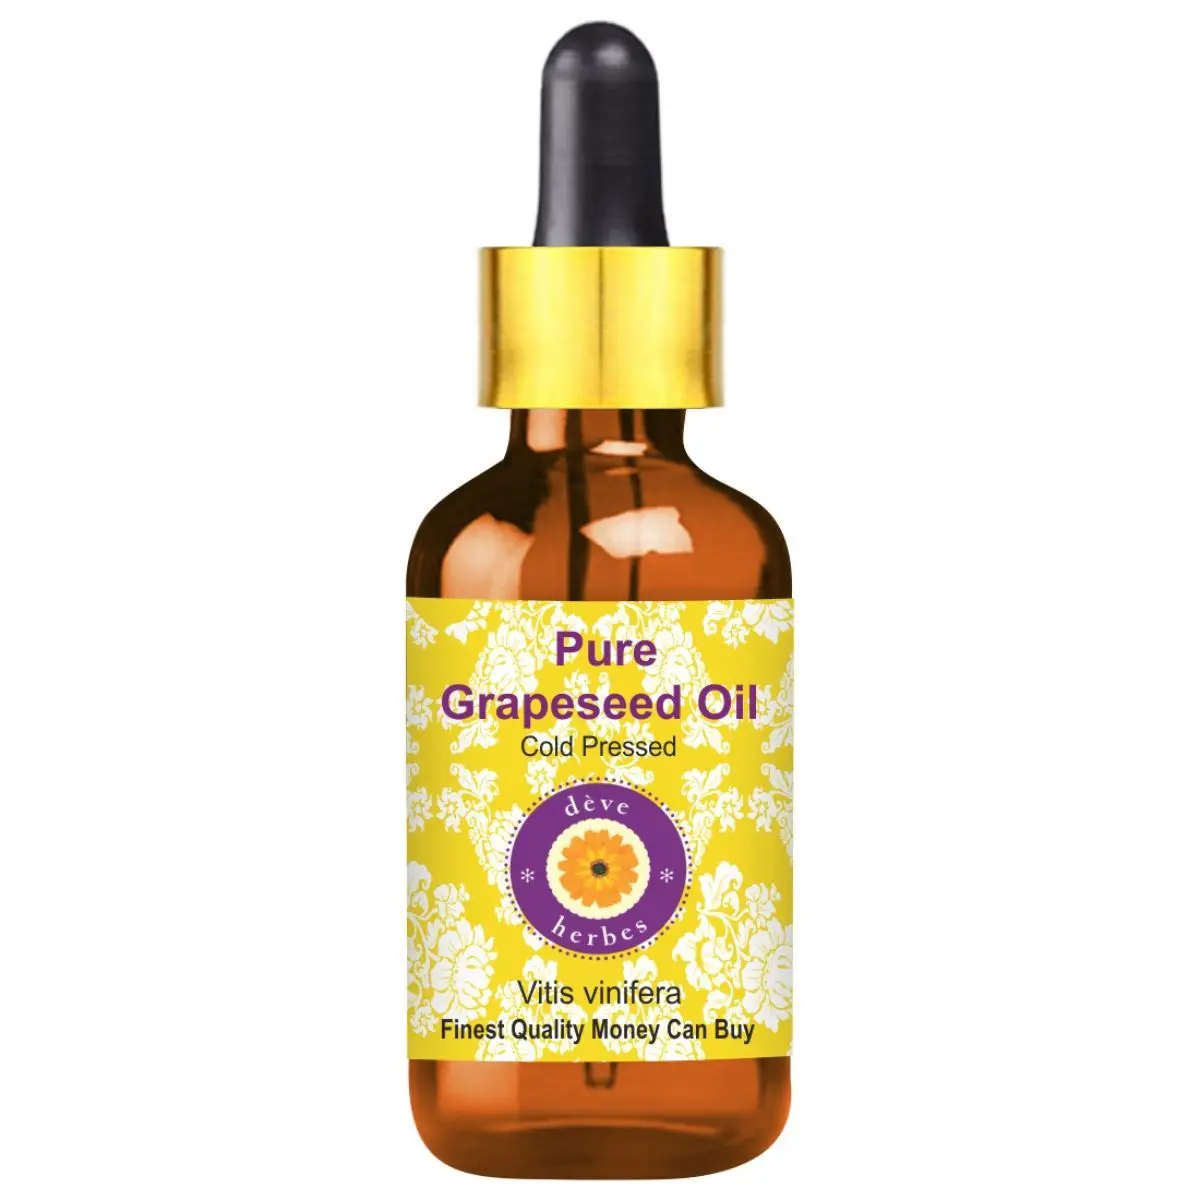 Deve Herbes Pure Grapeseed Oil (Vitis vinifera) with Glass Dropper Natural Therapeutic Grade Cold Pressed 10ml